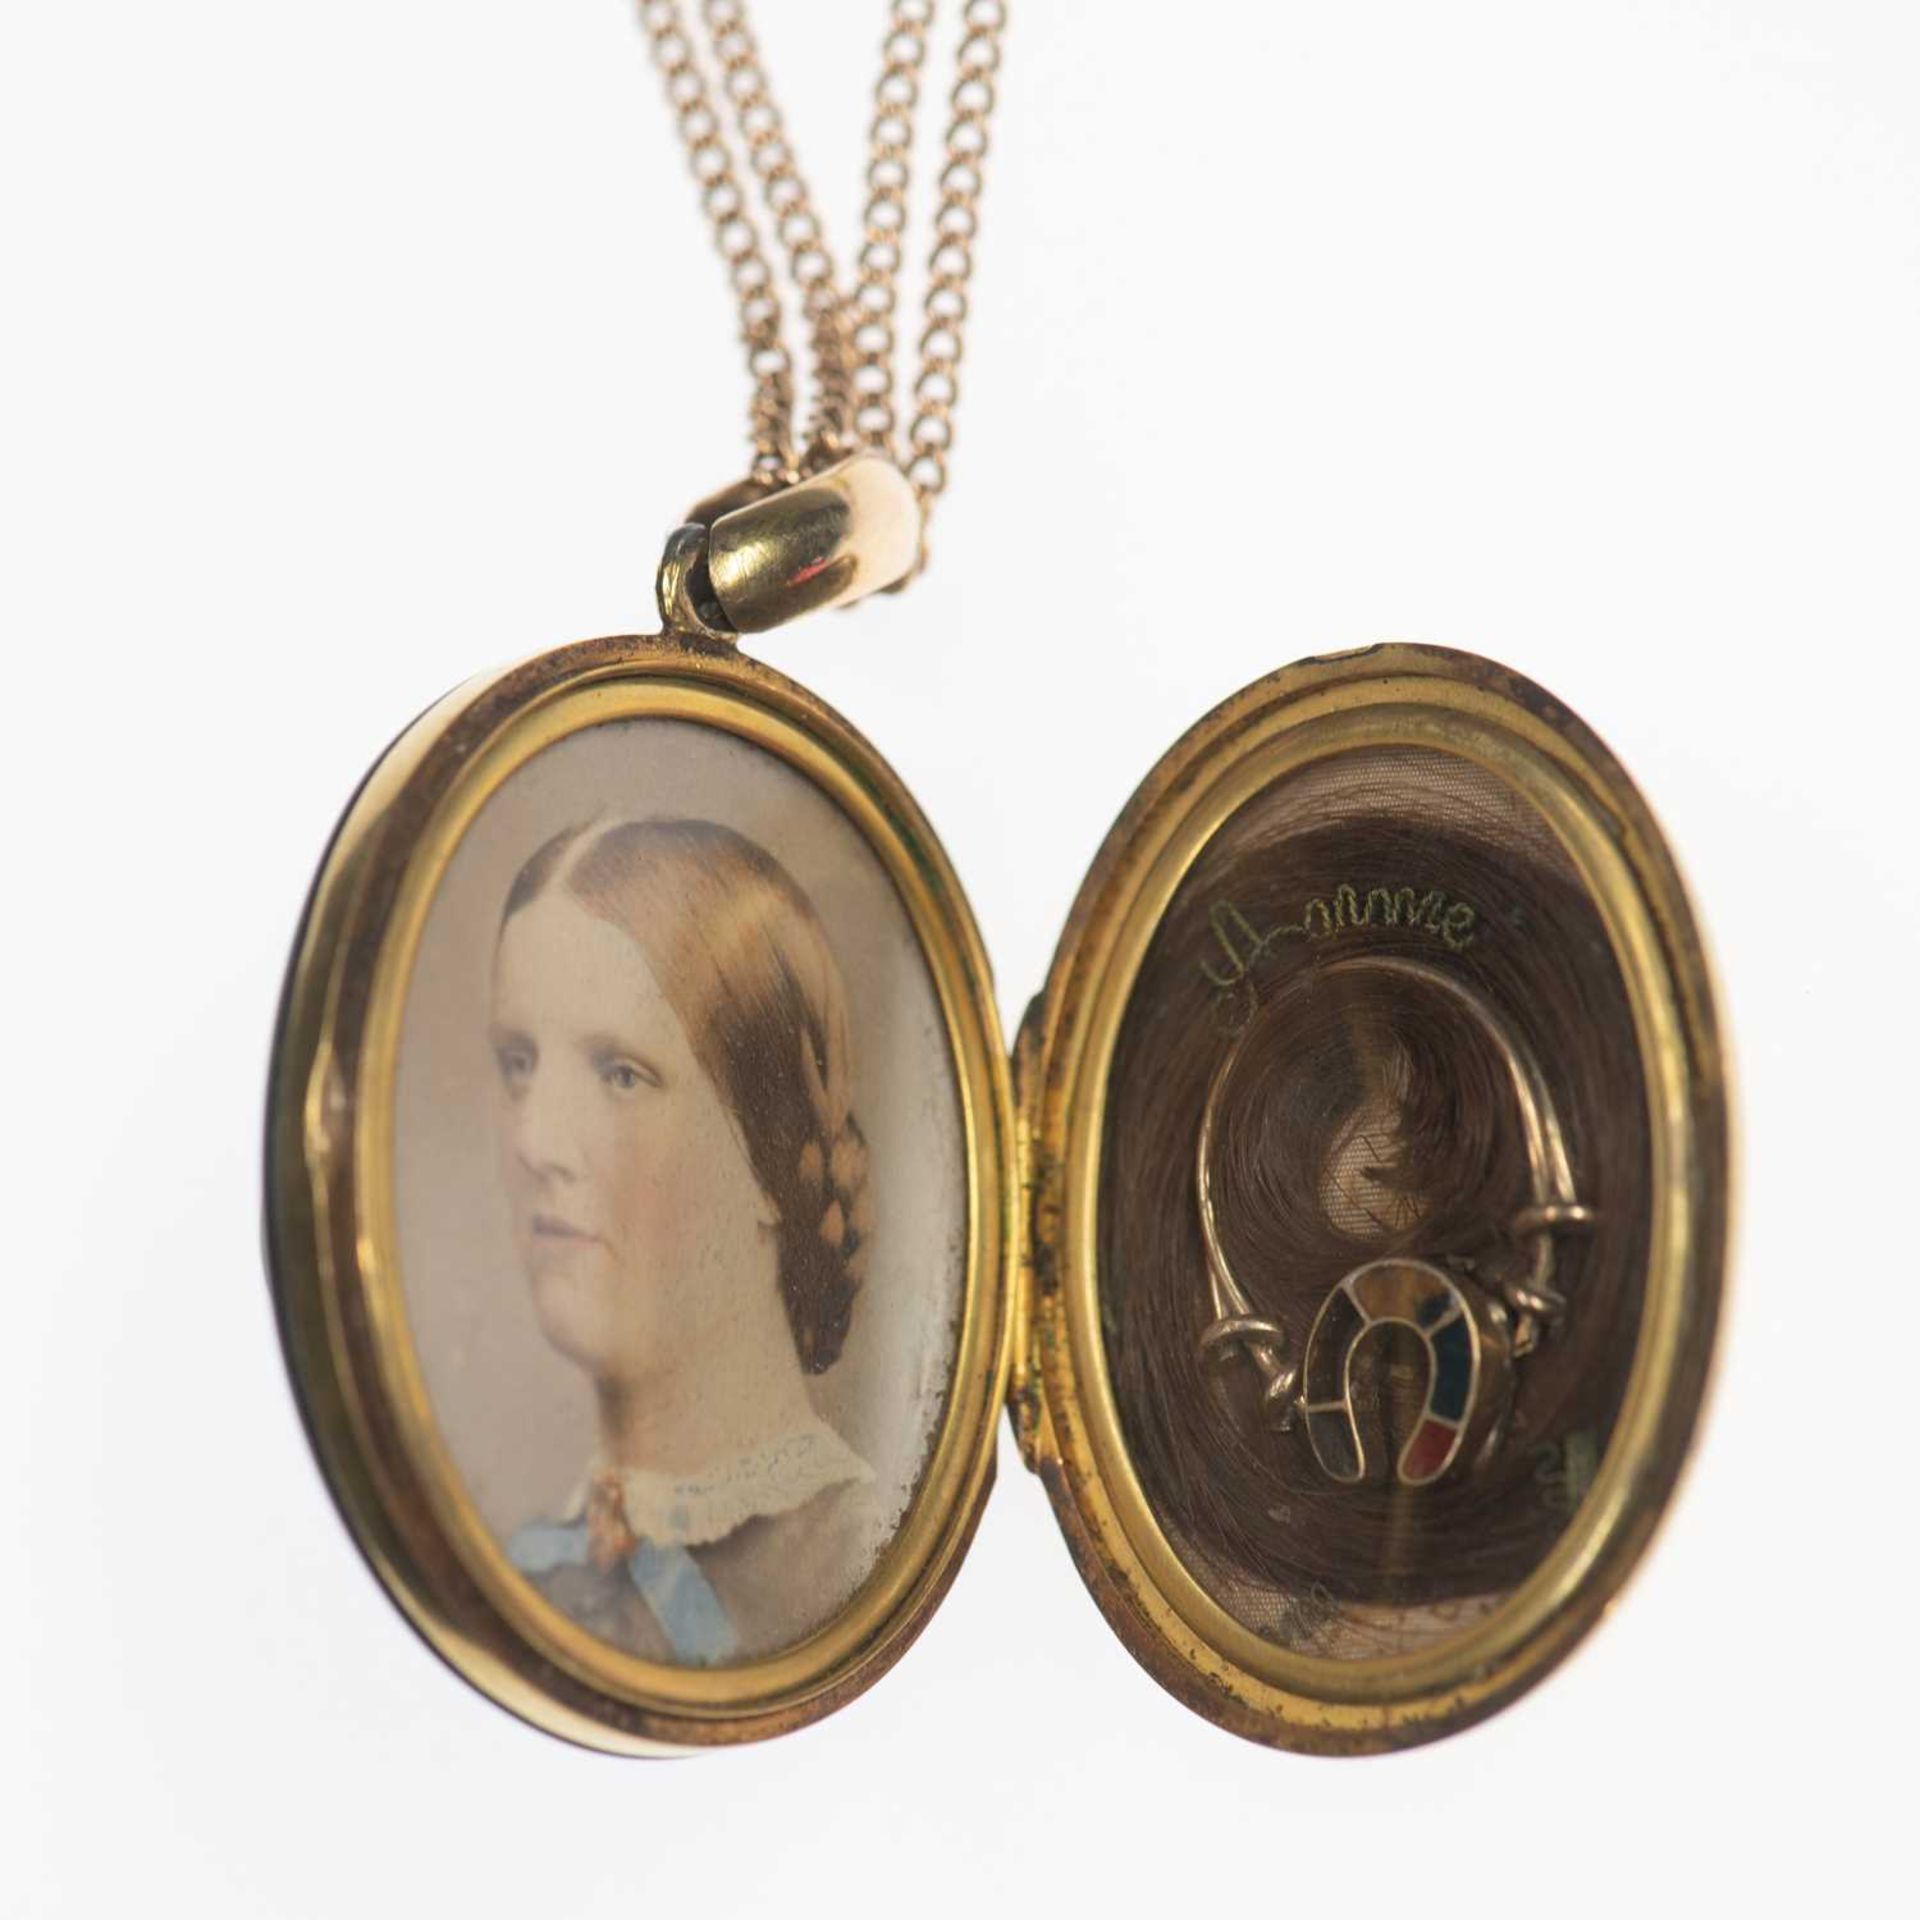 A VICTORIAN ONYX AND DIAMOND MOURNING LOCKET PENDANT ON CHAIN - Image 2 of 4